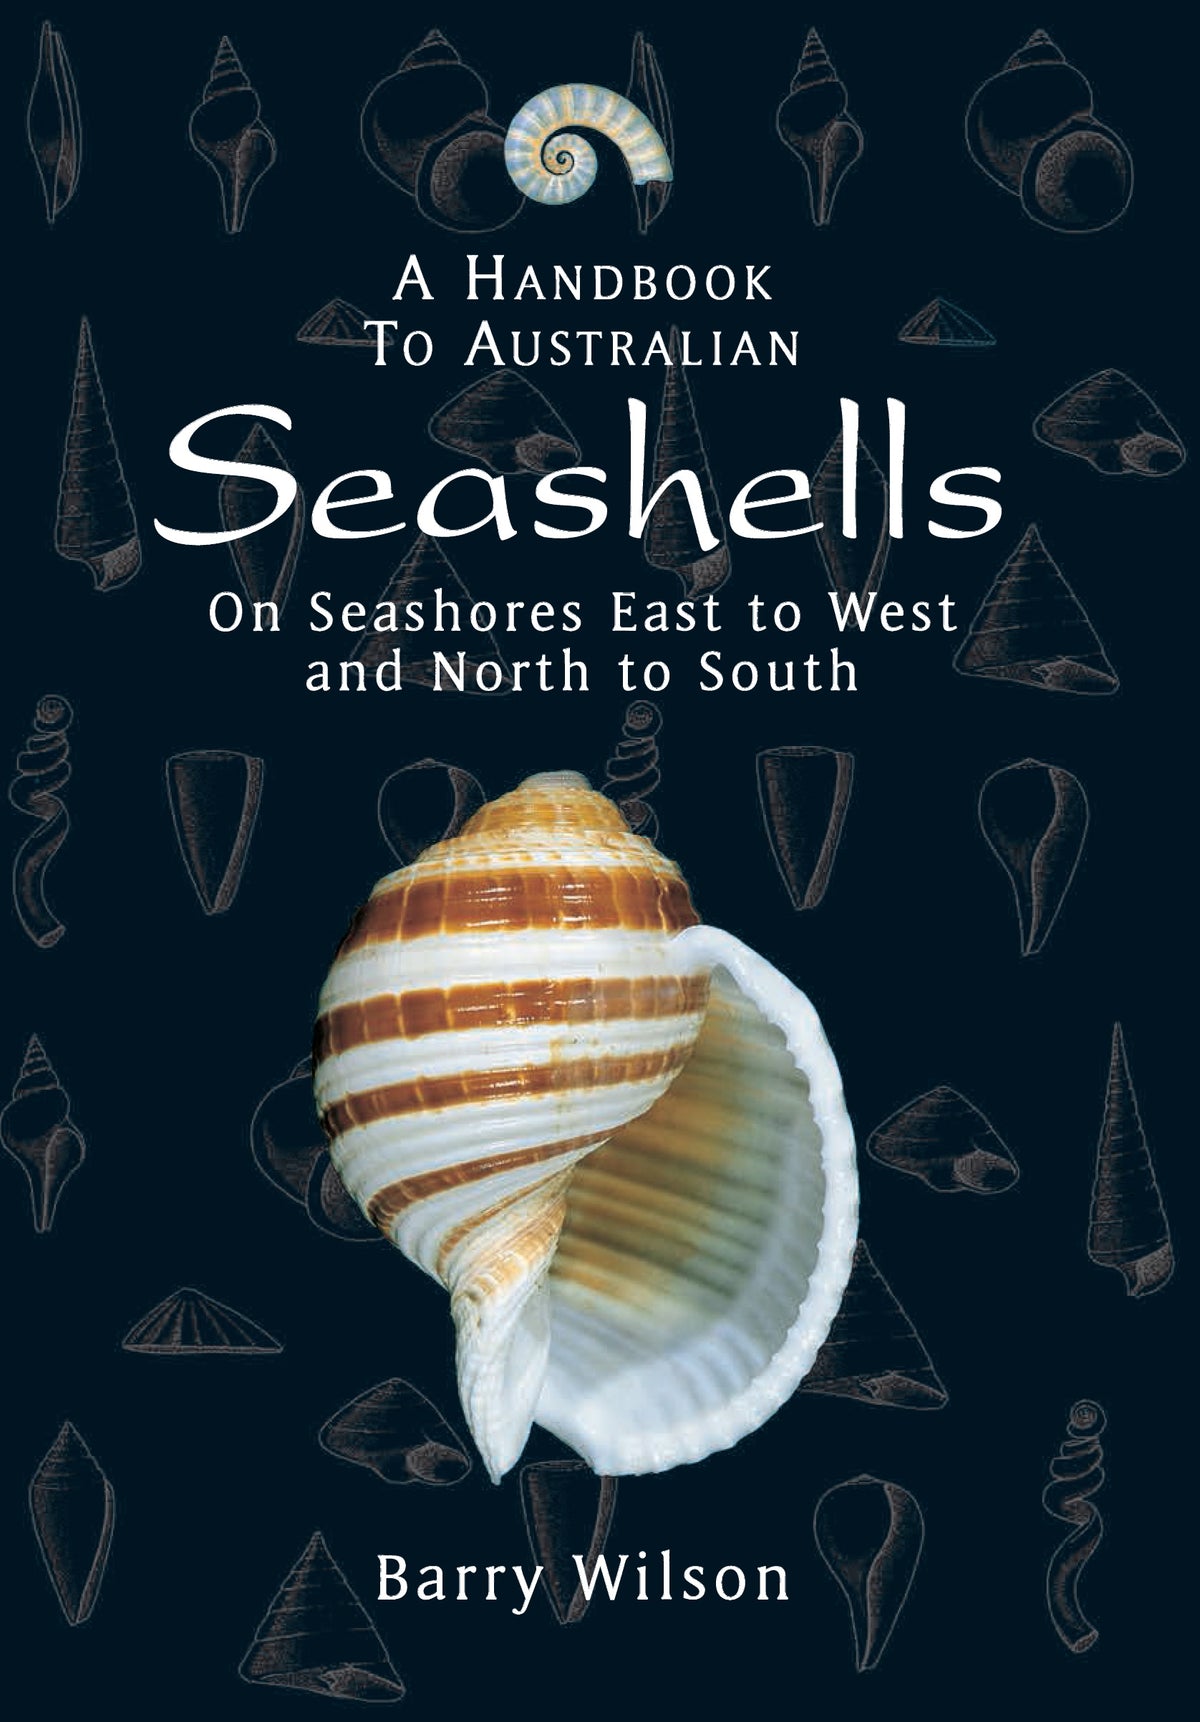 HANDBOOK TO AUSTRALIAN SEASHELLS ON SEASHORES EAST TO WEST AND NORTH TO SOUTH